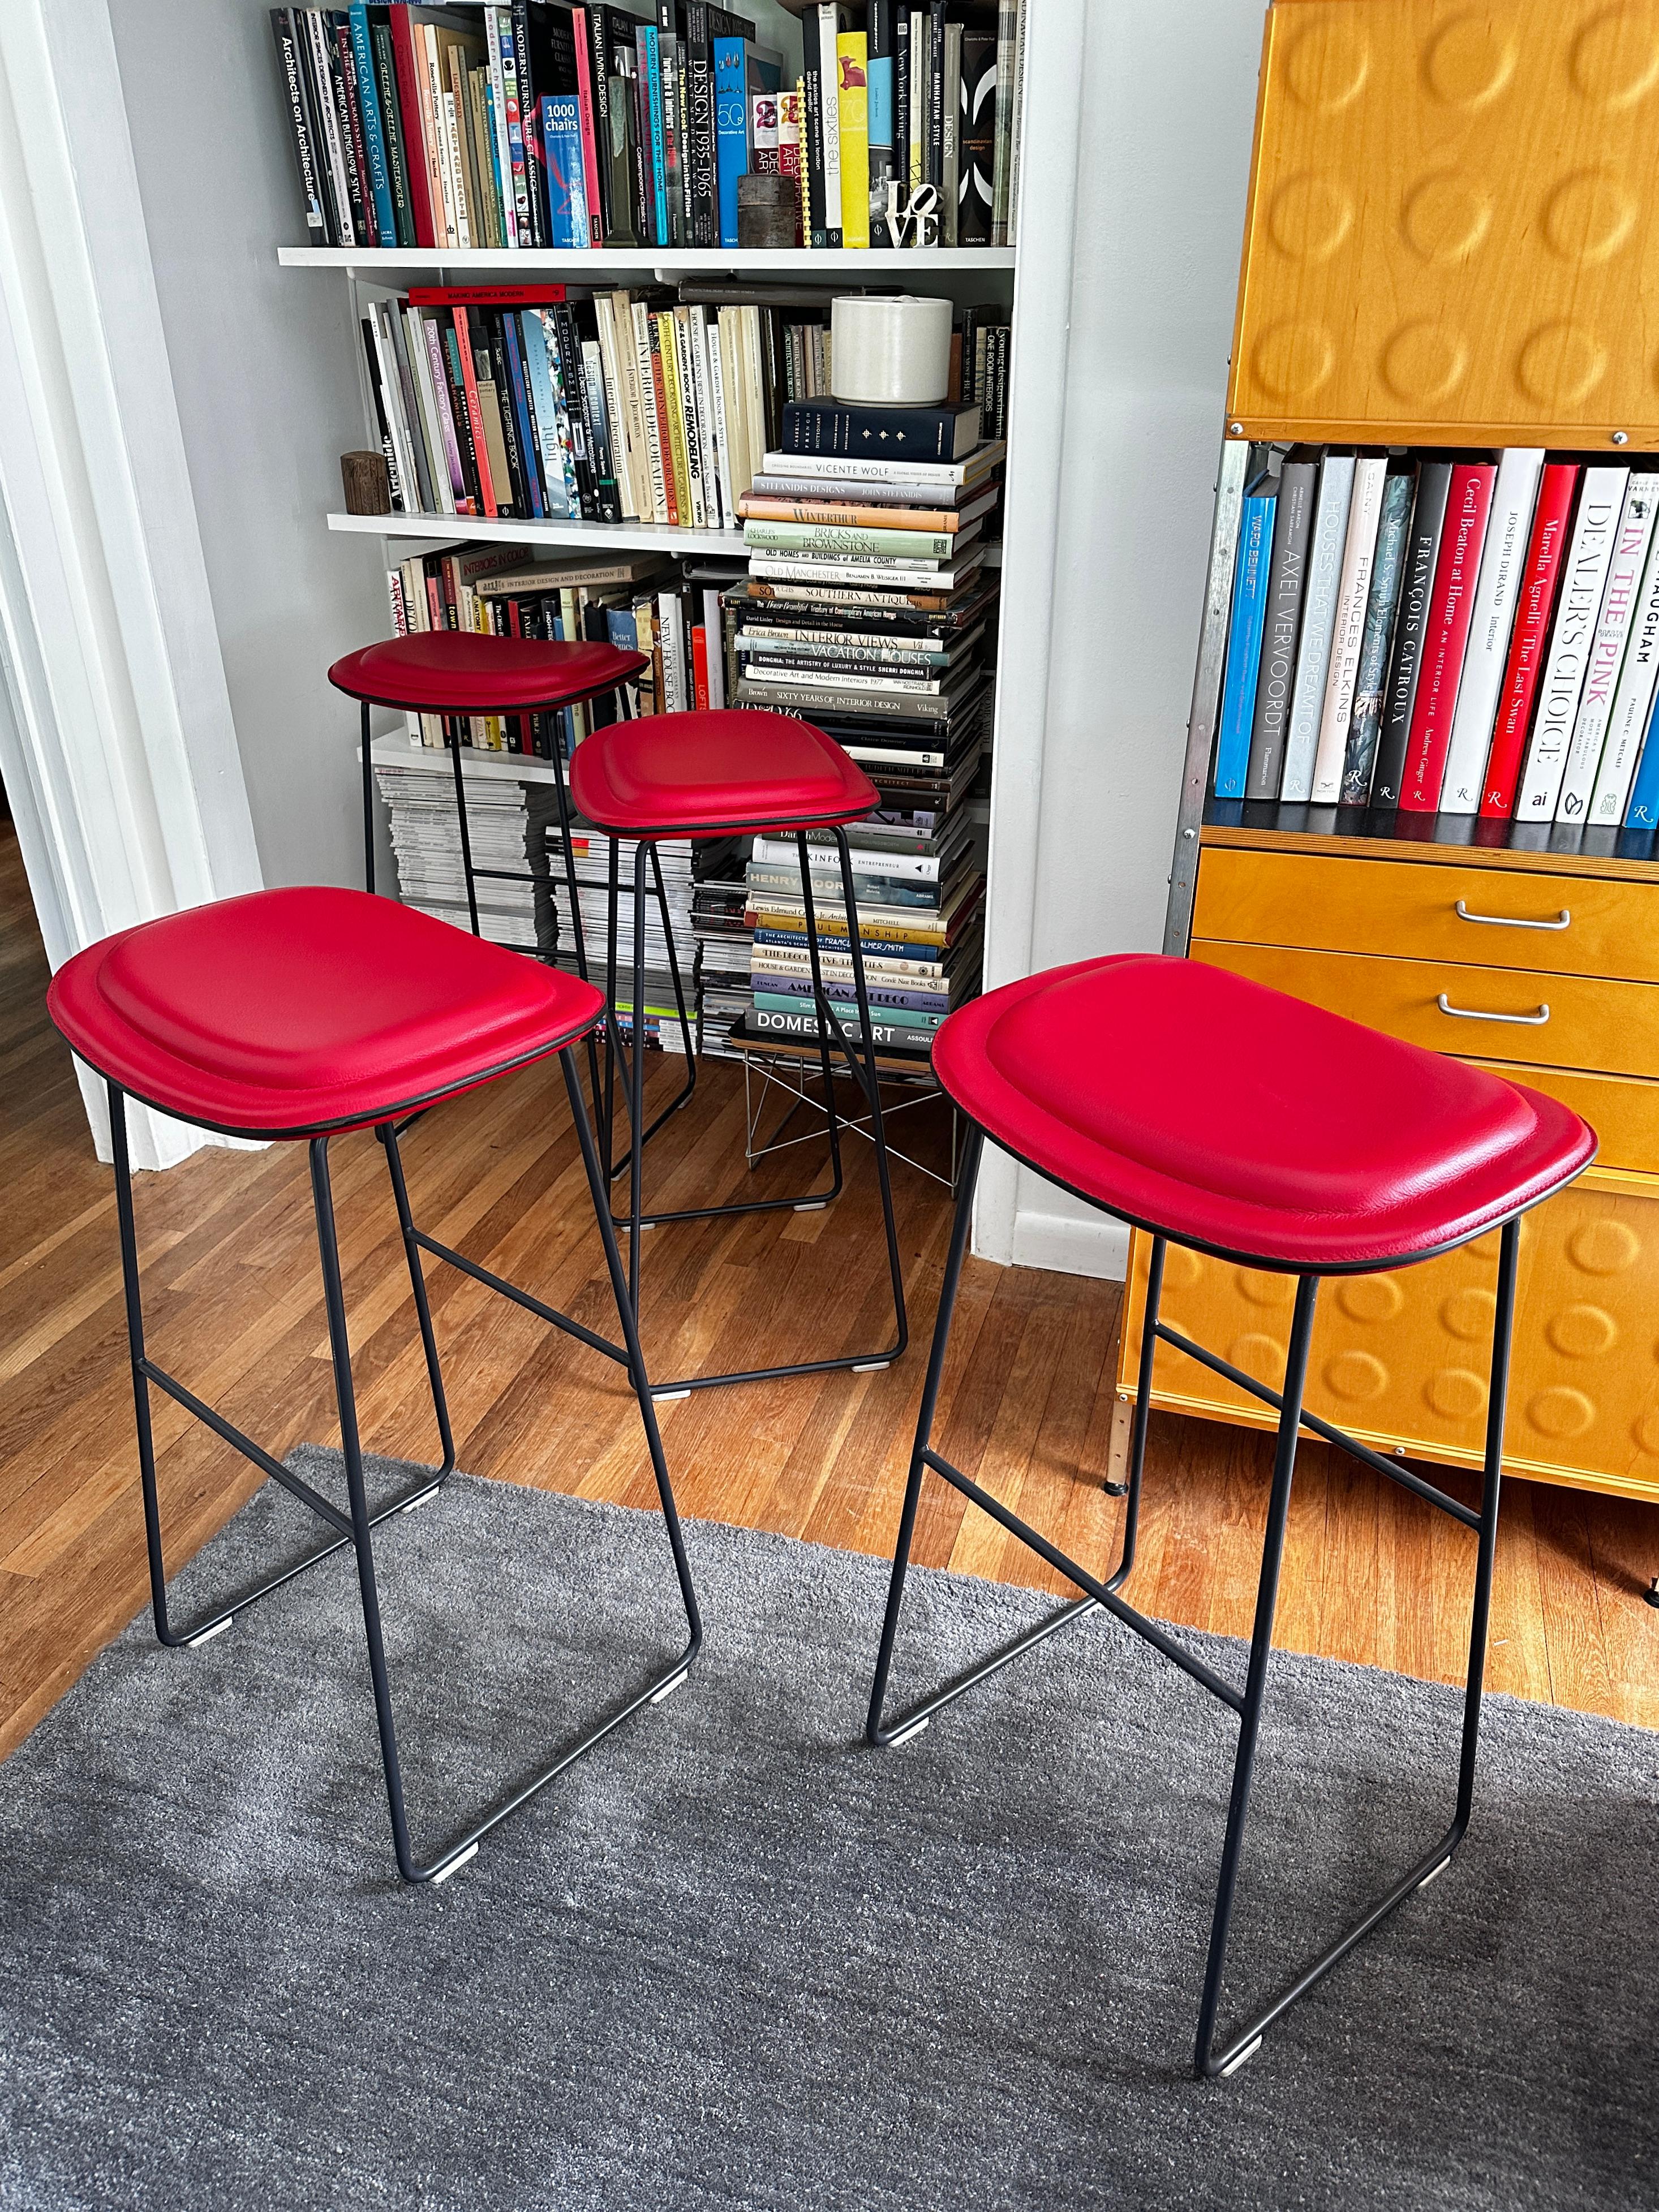 Four Hi Pad stools designed by Jasper Morrison in 2003 for Cappellini.  The seats are covered in red leather with a gun metal grey painted stainless steel base which rests on four polypropylene glides.  Of the three sizes available, these stools are